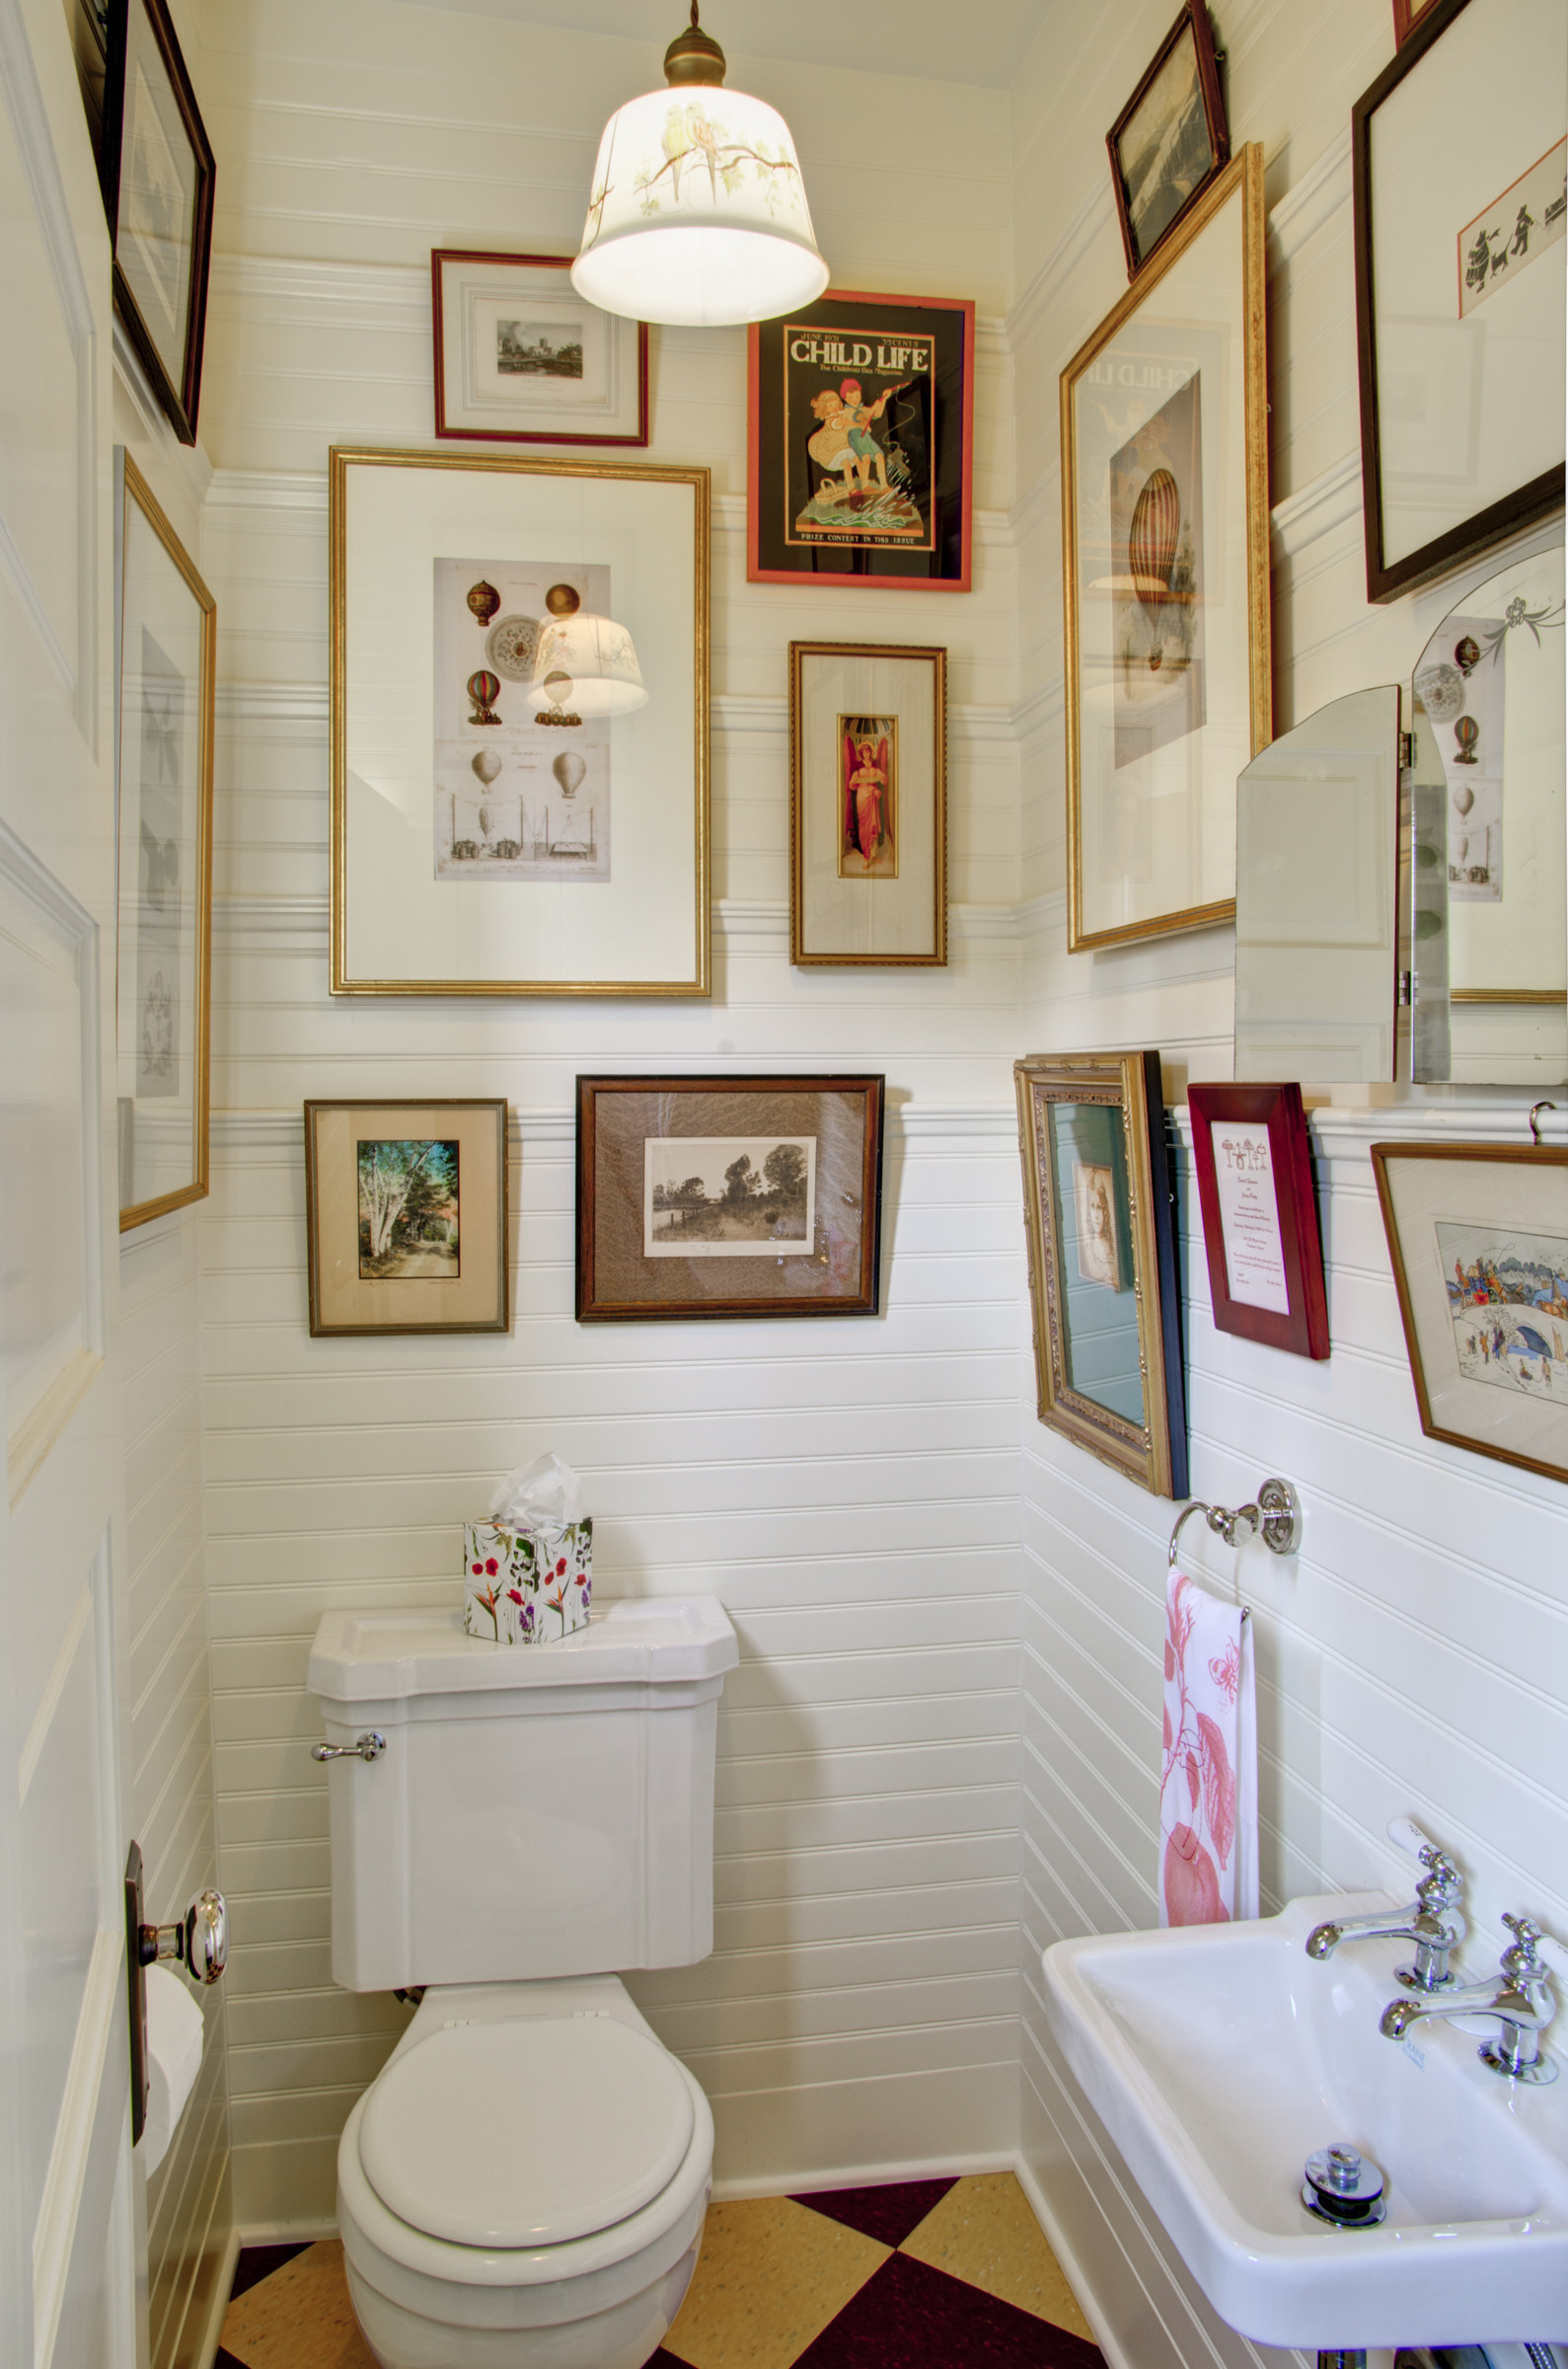 Bathroom Wall Designs
 Wall Decorating Ideas from Portland Seattle Home Builder